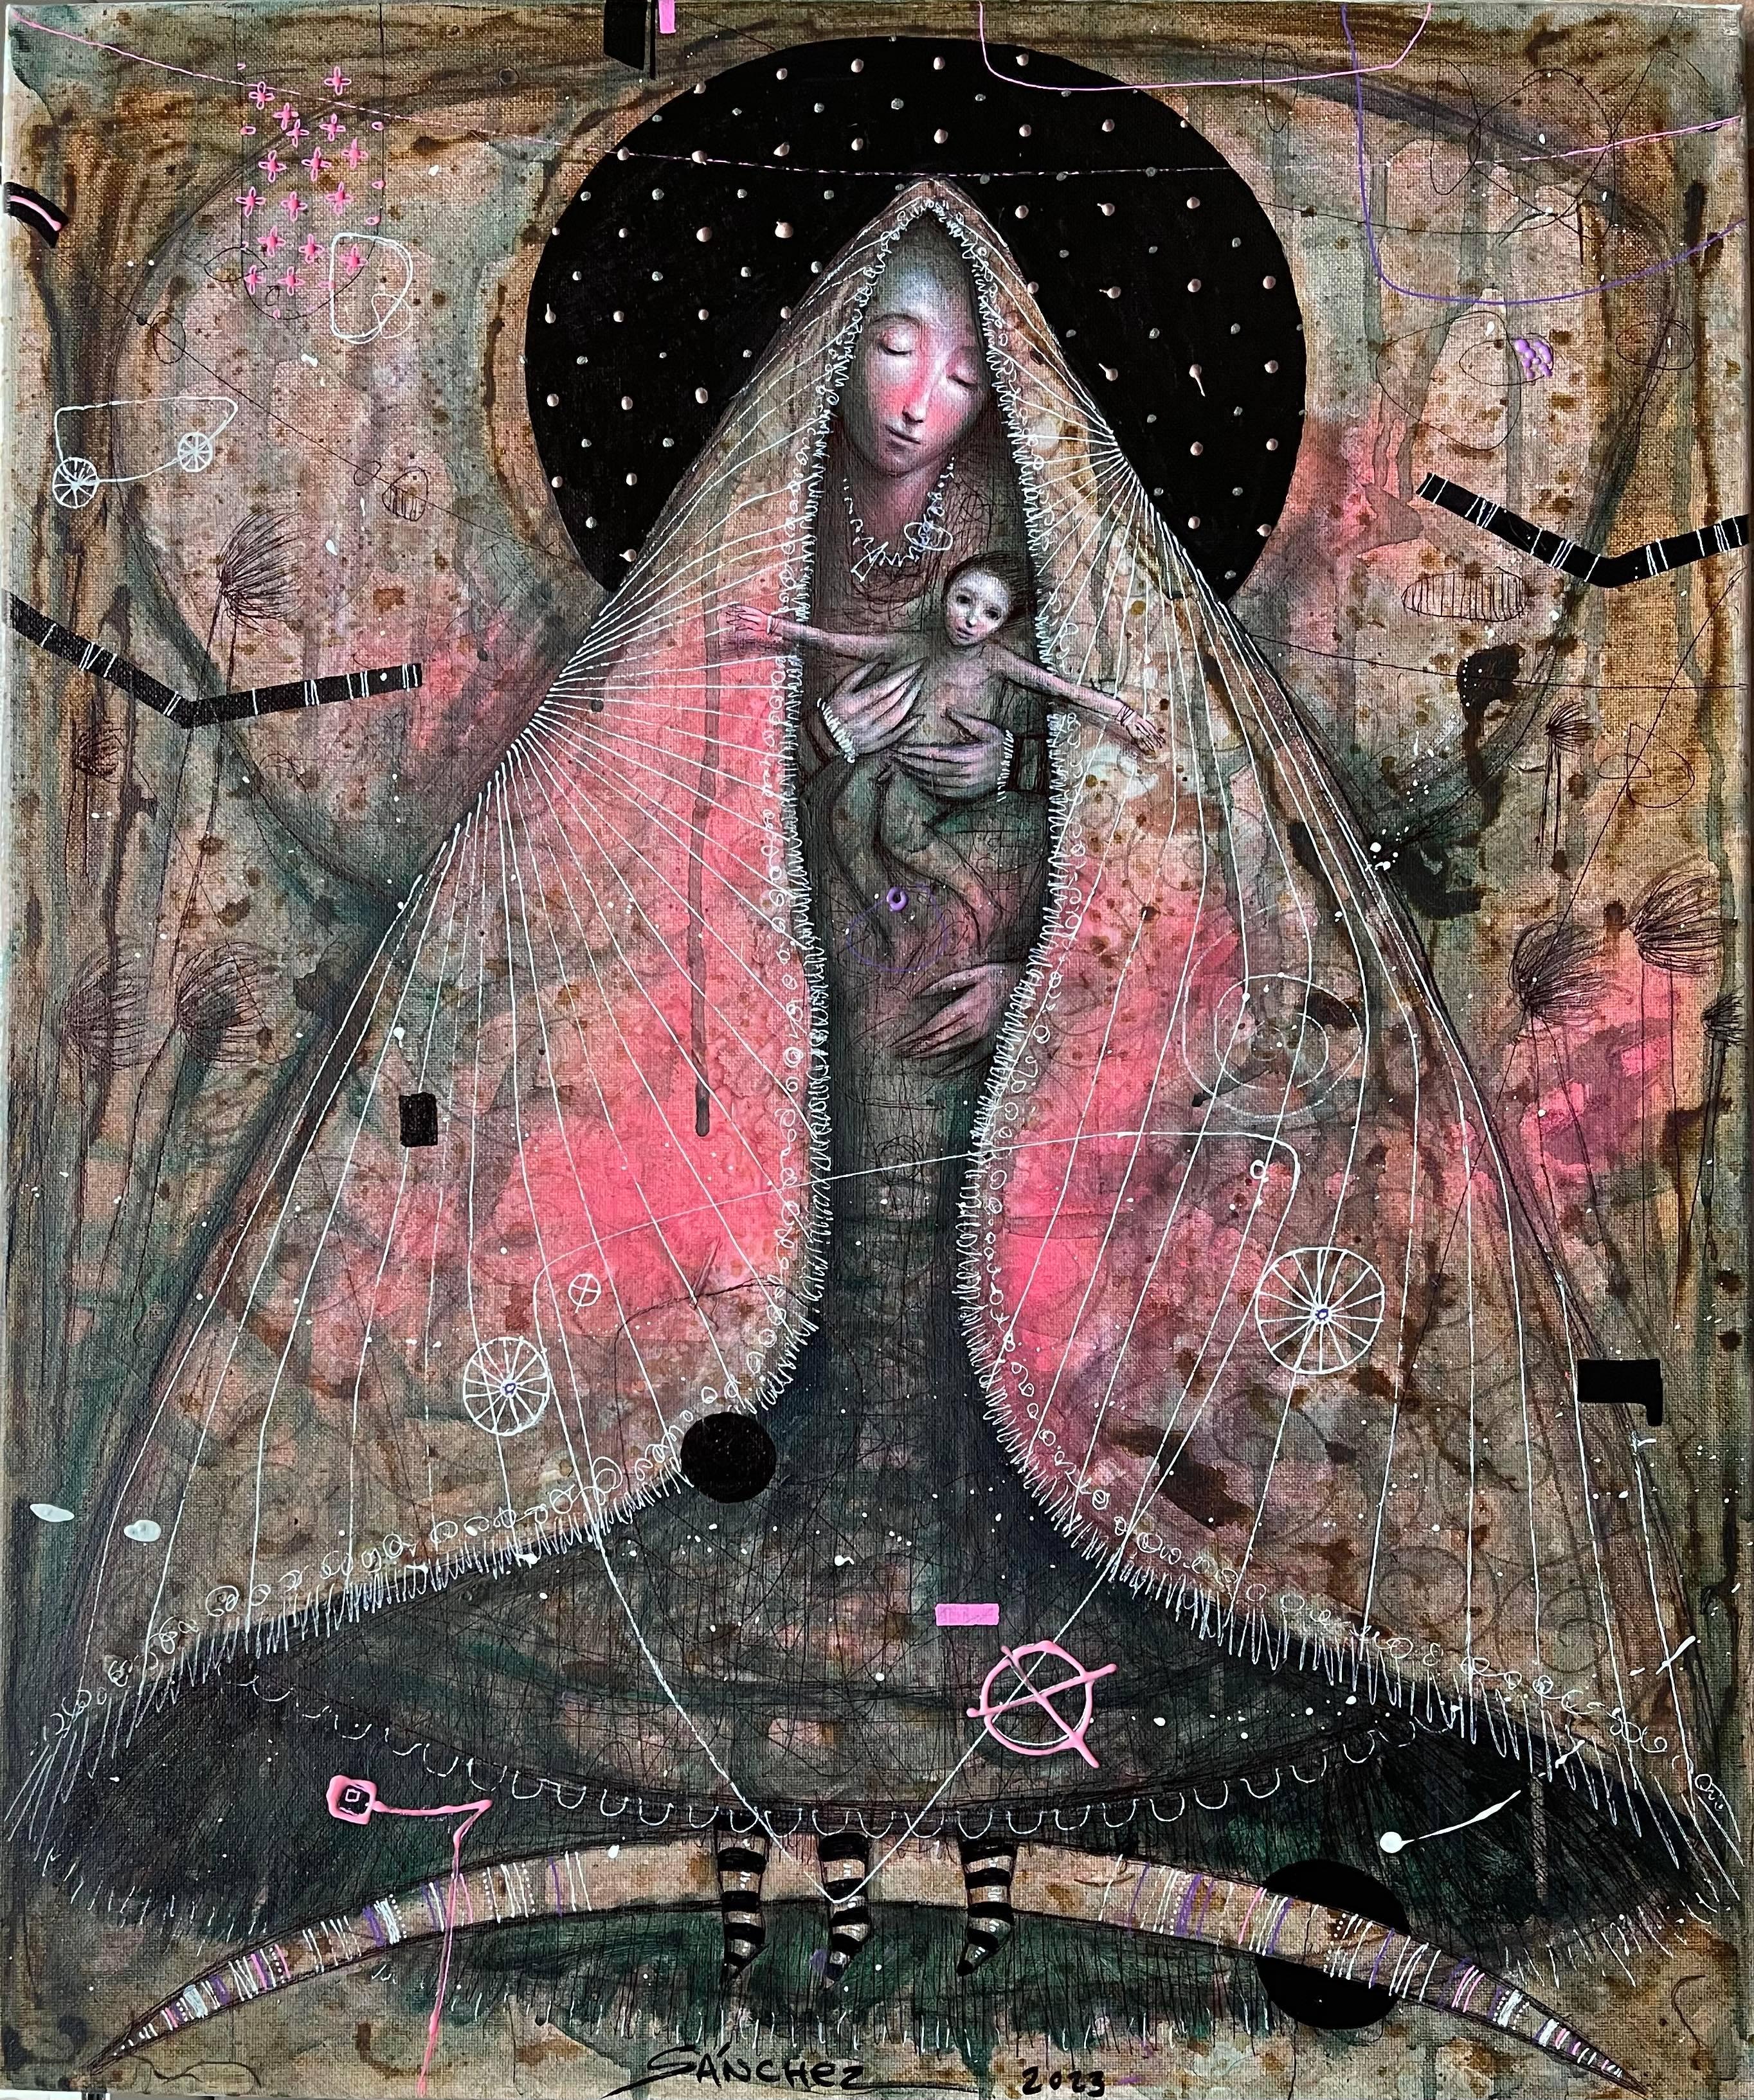 LOOK FOR FREE SHIPPING AT CHECKOUT.

The Virgin and Child - La Virgen y Nino was recently painted by the Cuban artist Brian Sanchez in 2023. It is oil and mixed media on linen  .  The Virgin and Child - La Virgen y Nino  by Brian Sanchez shows  the